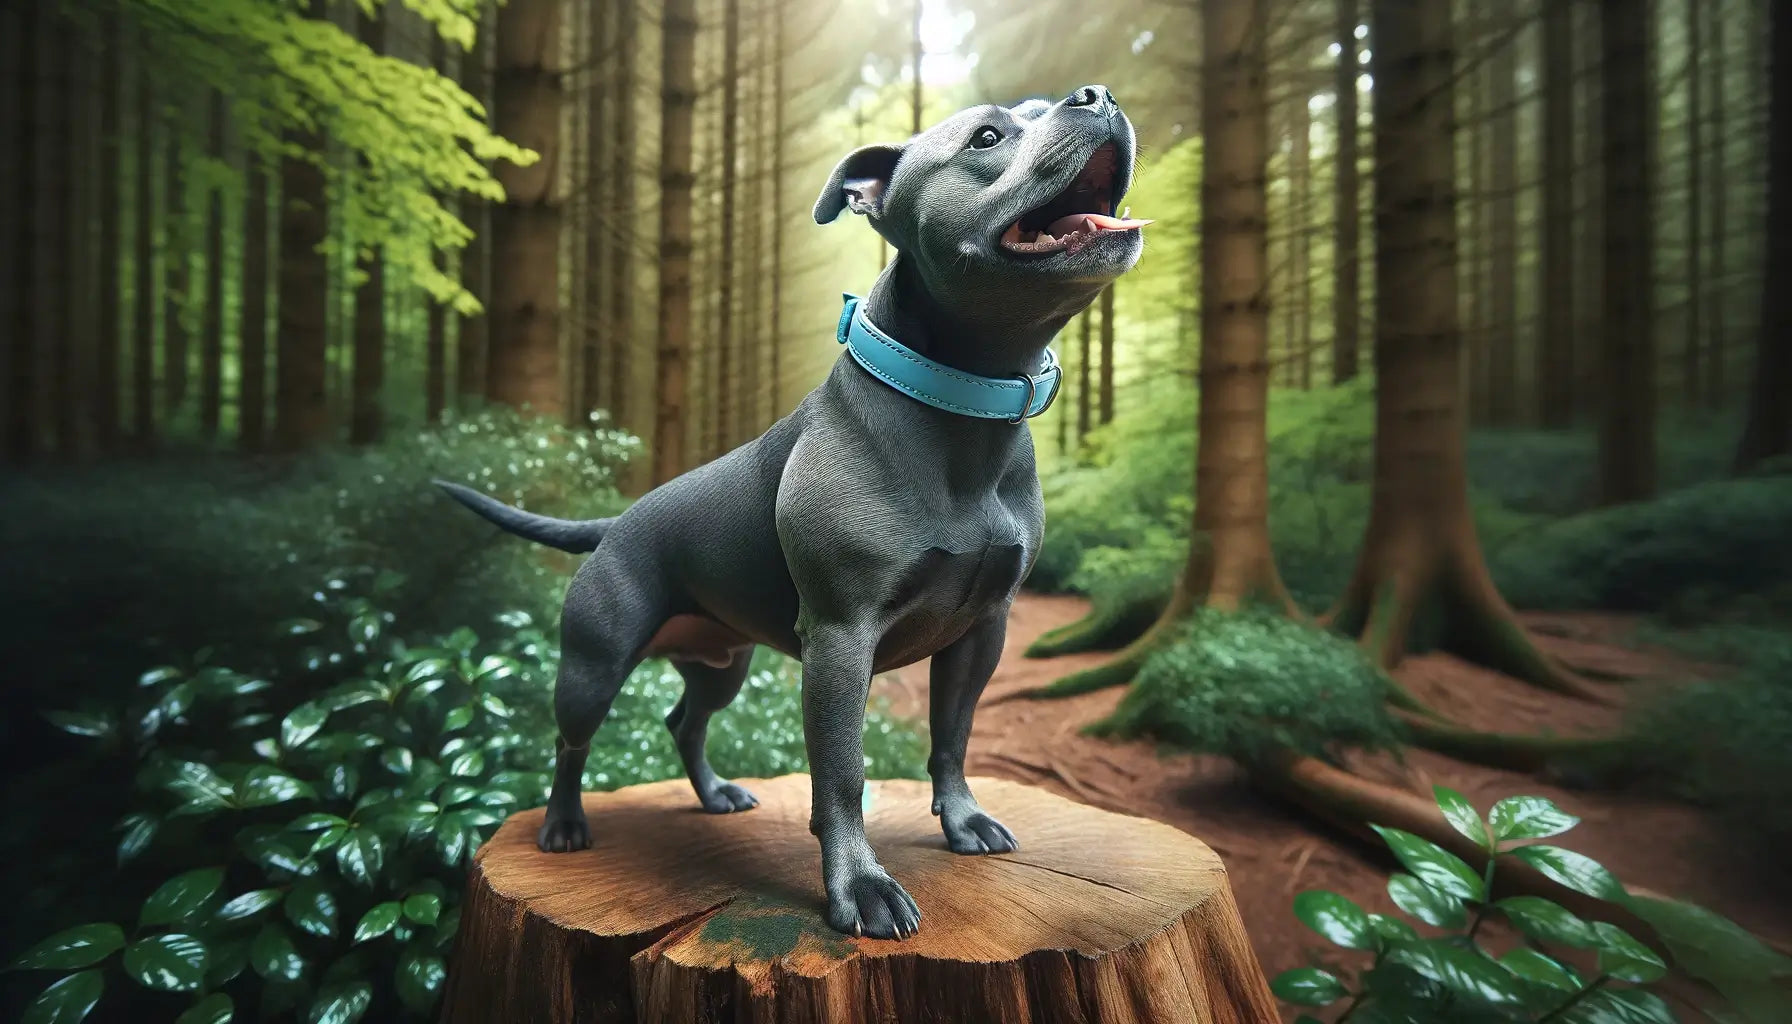 Blue Staffy dog perched on top of a wooden stump in a lush forest setting, appearing to be mid-bark or call.